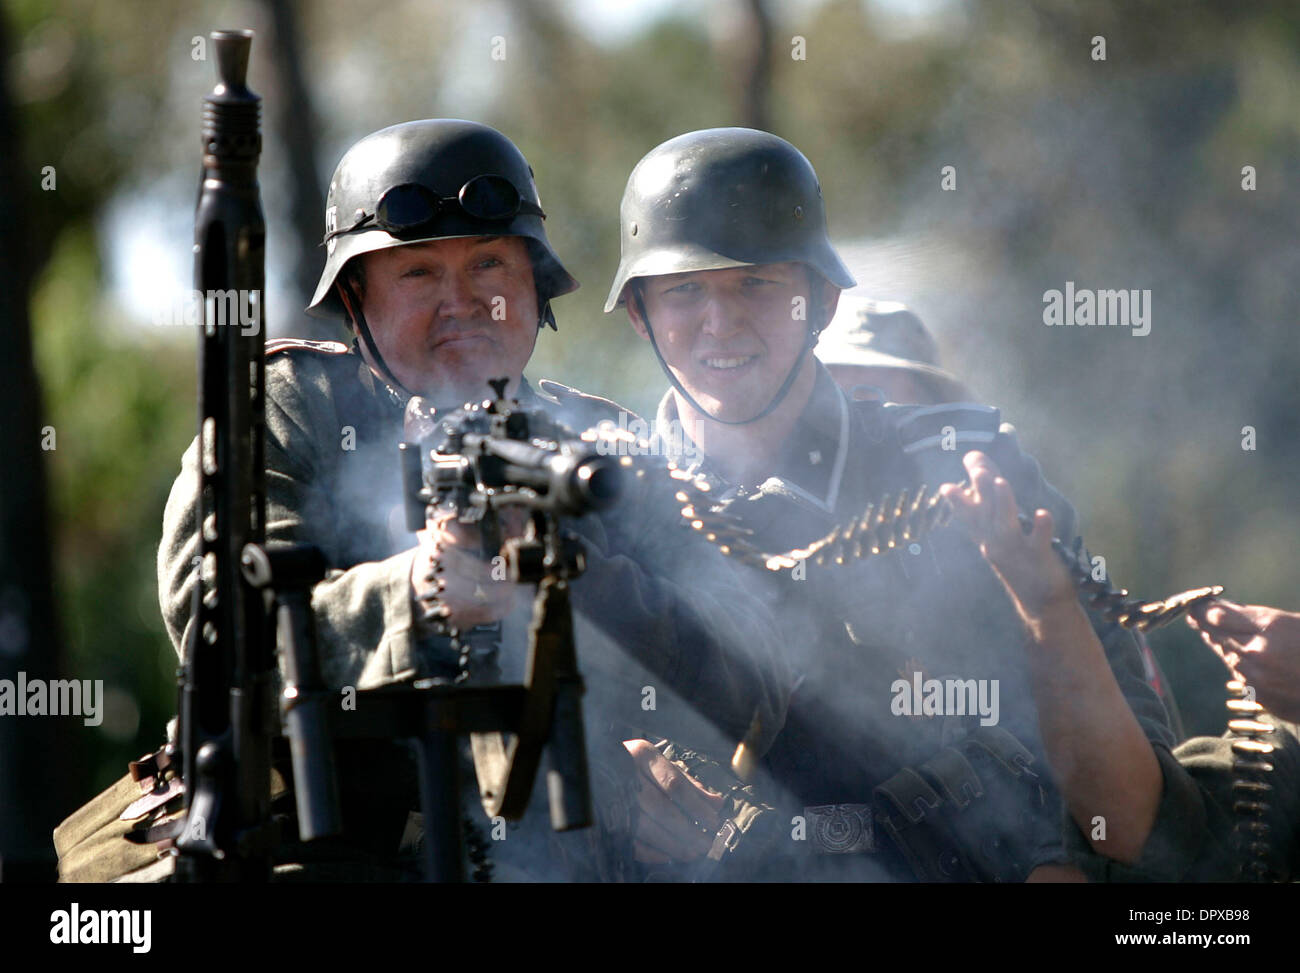 Jan 10, 2009 - Stuart, Florida, USA - Tim Brooks fires a German MG 42, while James Mislow watches to make sure the gun doesn't jam during a weapons demonstration on Jan. 10, 2009 in Stuart, FL. The demonstration was just one of the many events that was put on for the grand opening of the Road To Victory Museum in Stuart. (Credit Image: © Guy Kitchens/ZUMA Press) Stock Photo